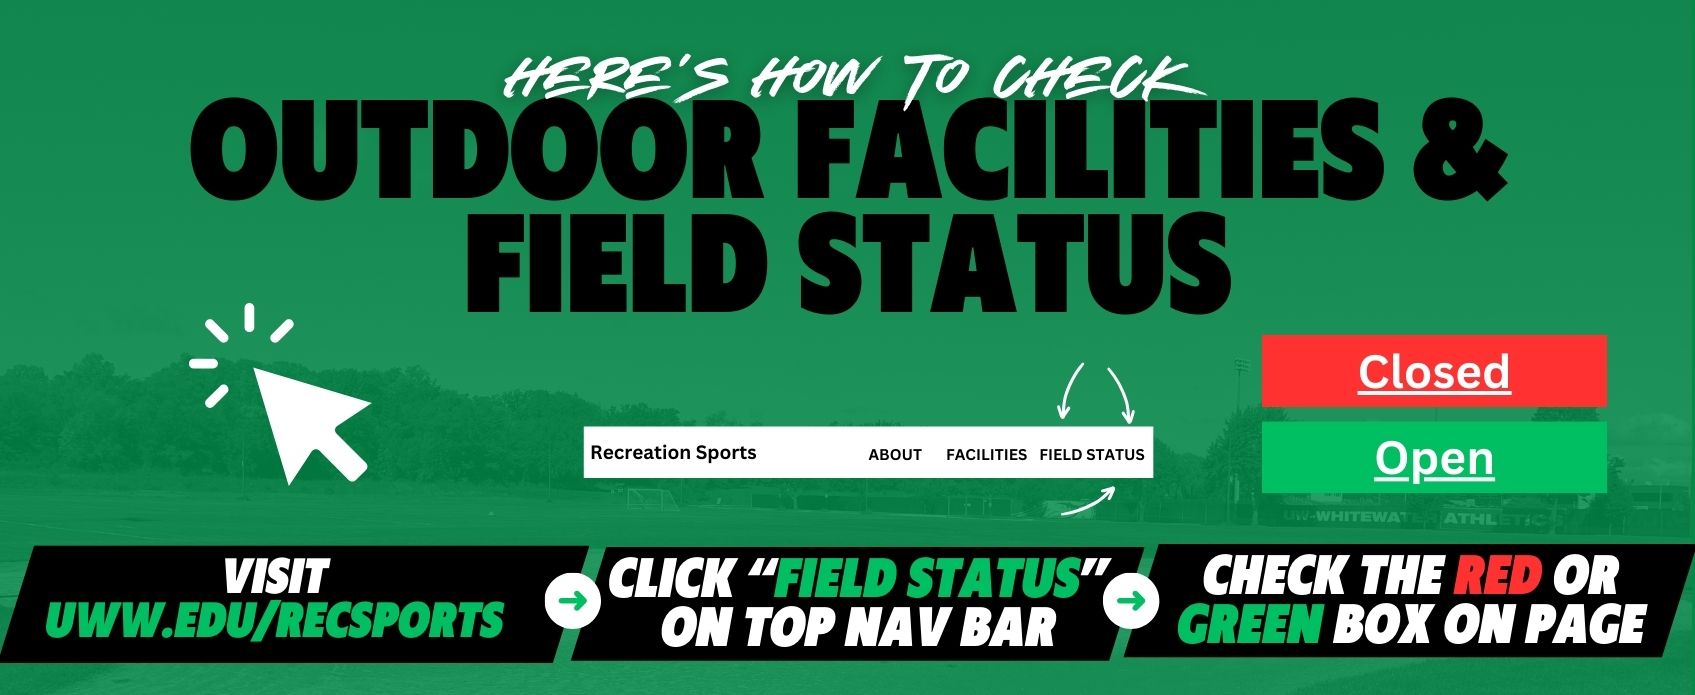 Check Facilities and Field Status